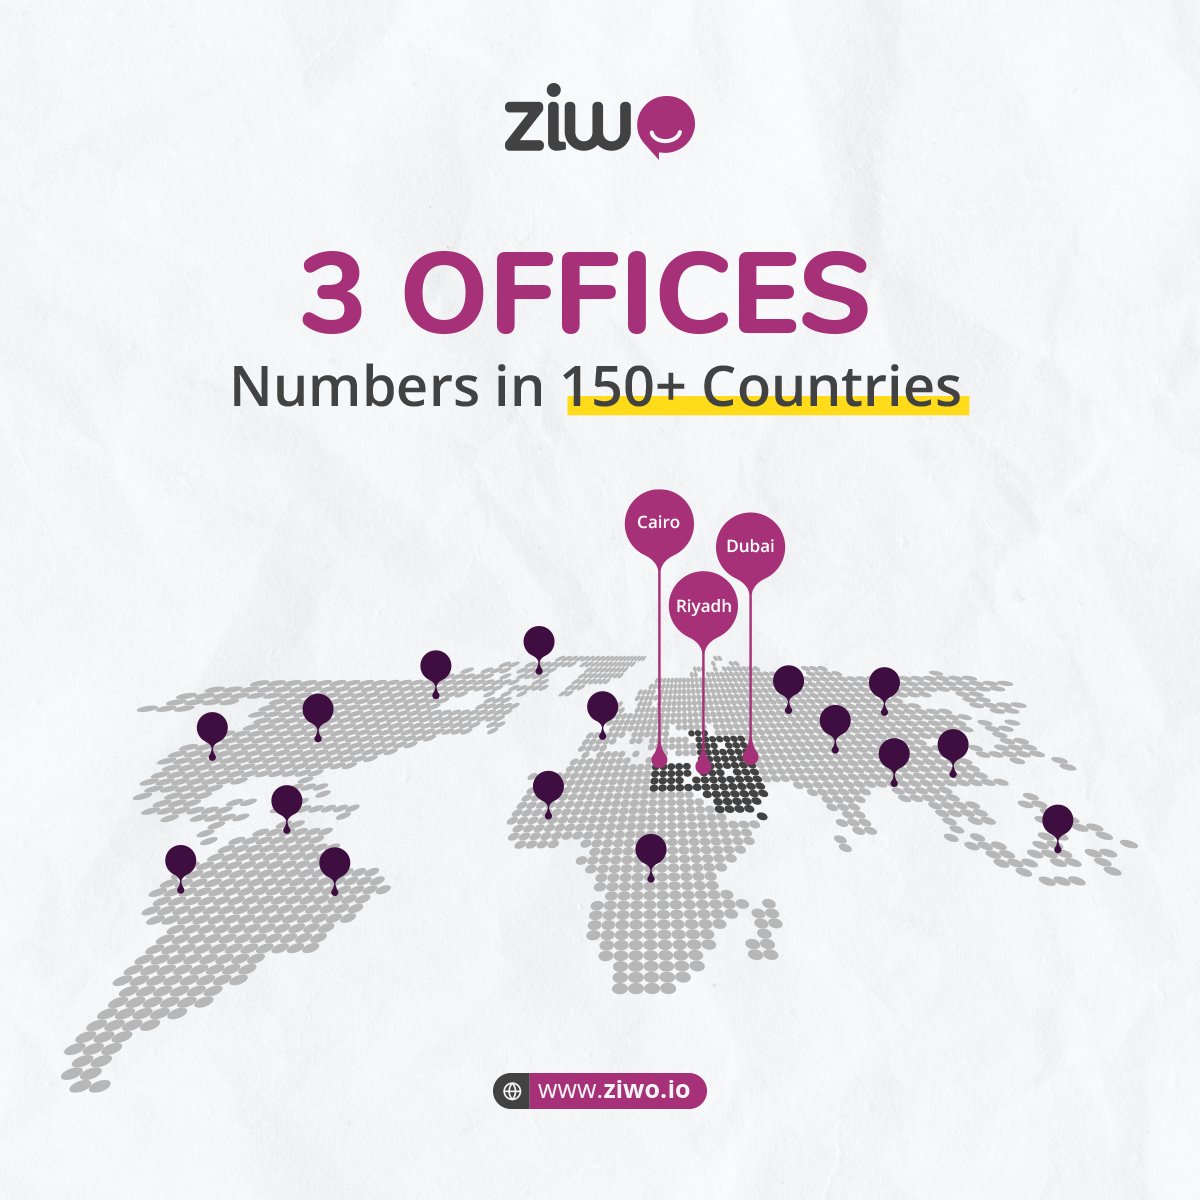 Expanding Our Reach in the #MiddleEast and Beyond! 🌍

ZIWO's offices are now in #Dubai, #Riyadh, and #Cairo! 🇦🇪 🇸🇦 🇪🇬

Join us as we revolutionize #CustomerExperience and unlock new possibilities for businesses throughout the region and beyond 💜

#CX #CCaaS #CloudContactCenter